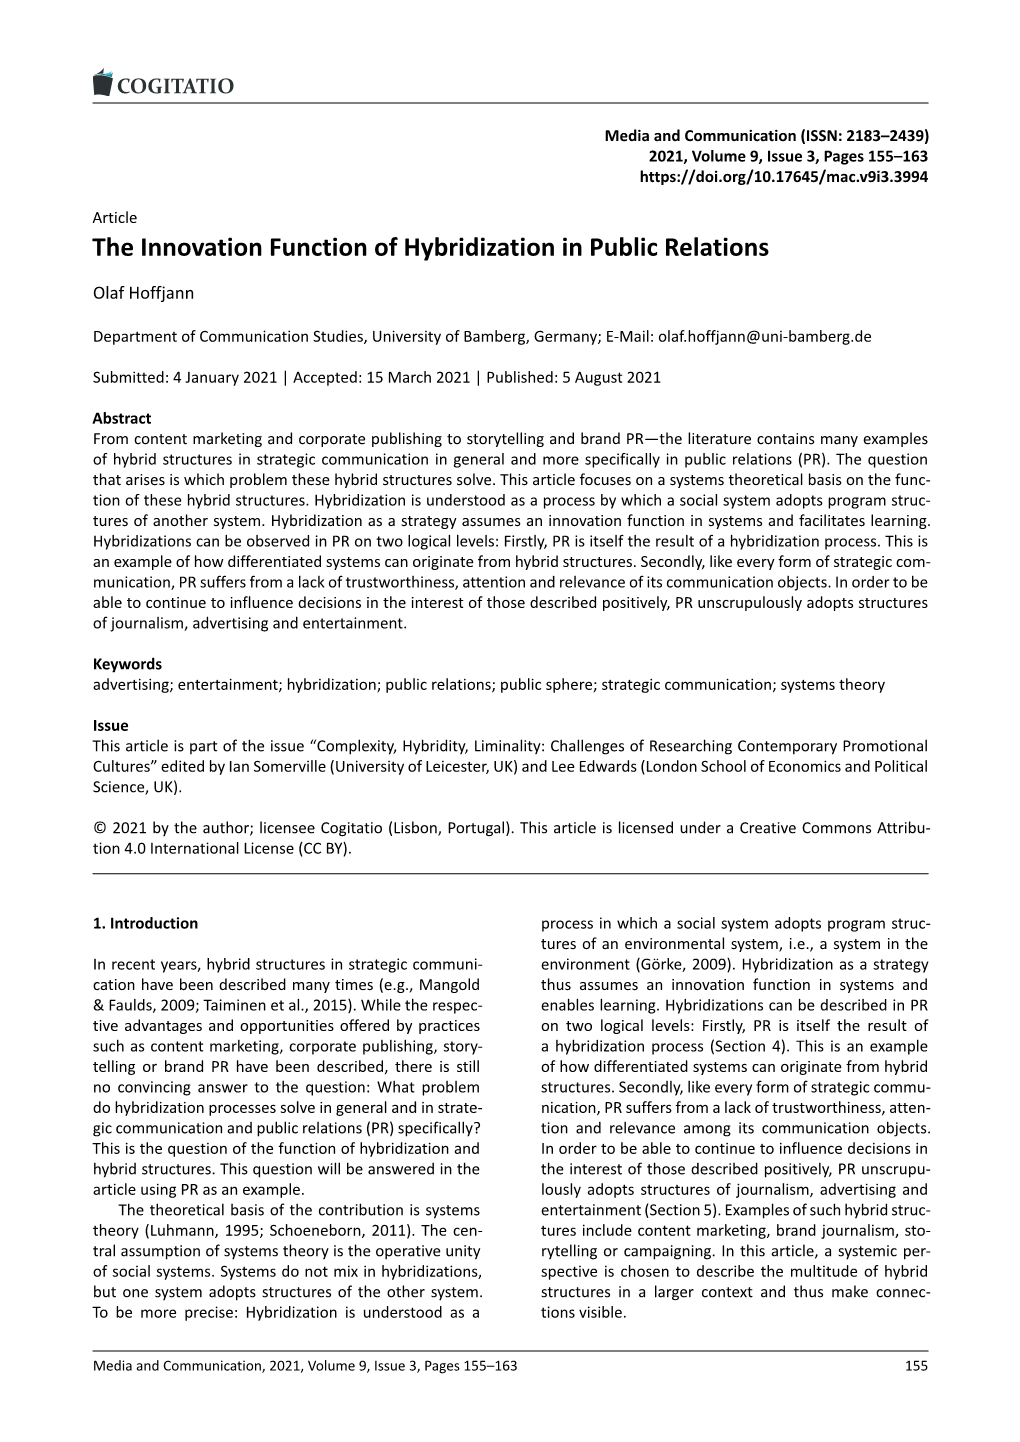 The Innovation Function of Hybridization in Public Relations